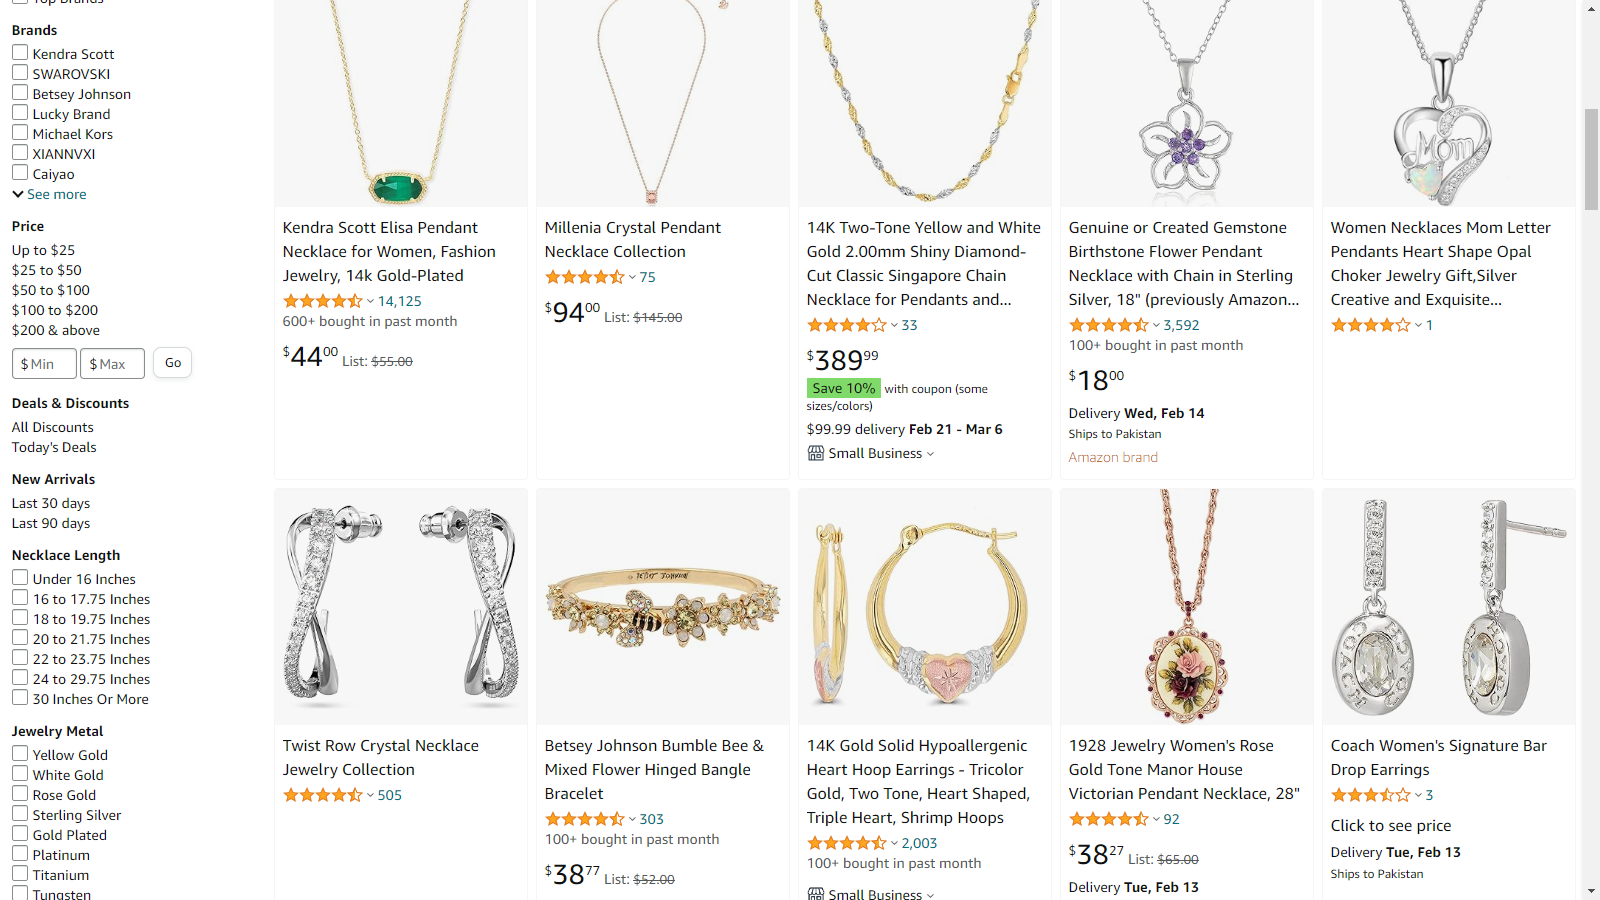 Jewelry Journeys: Immerse Yourself & Save 30% OFF!